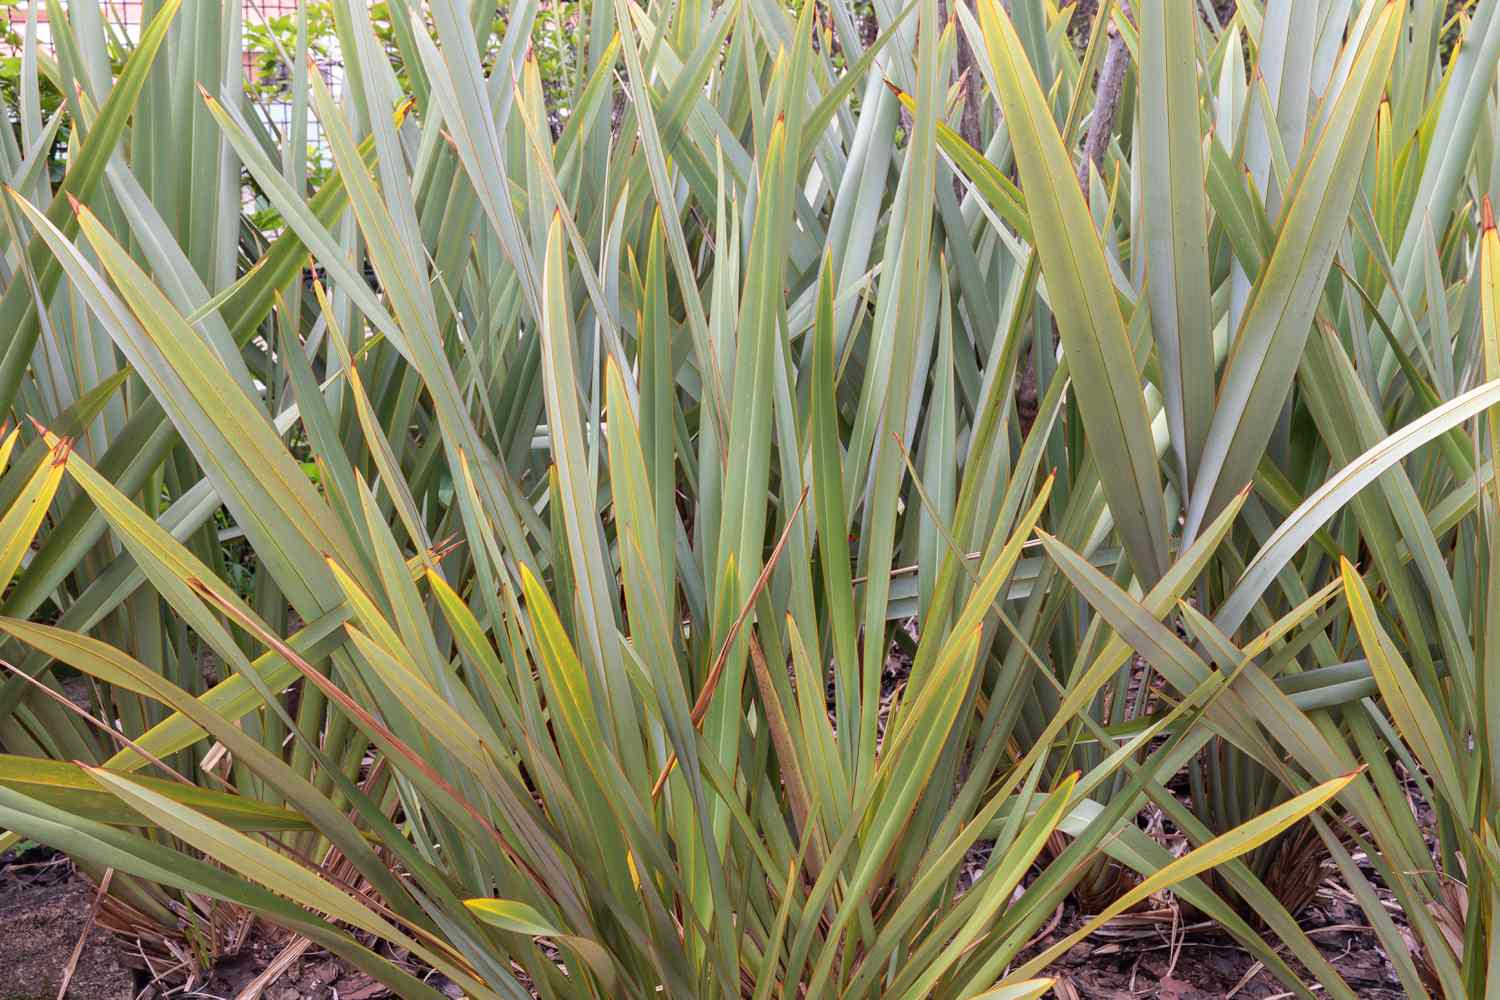 frontal view of New Zealand flax